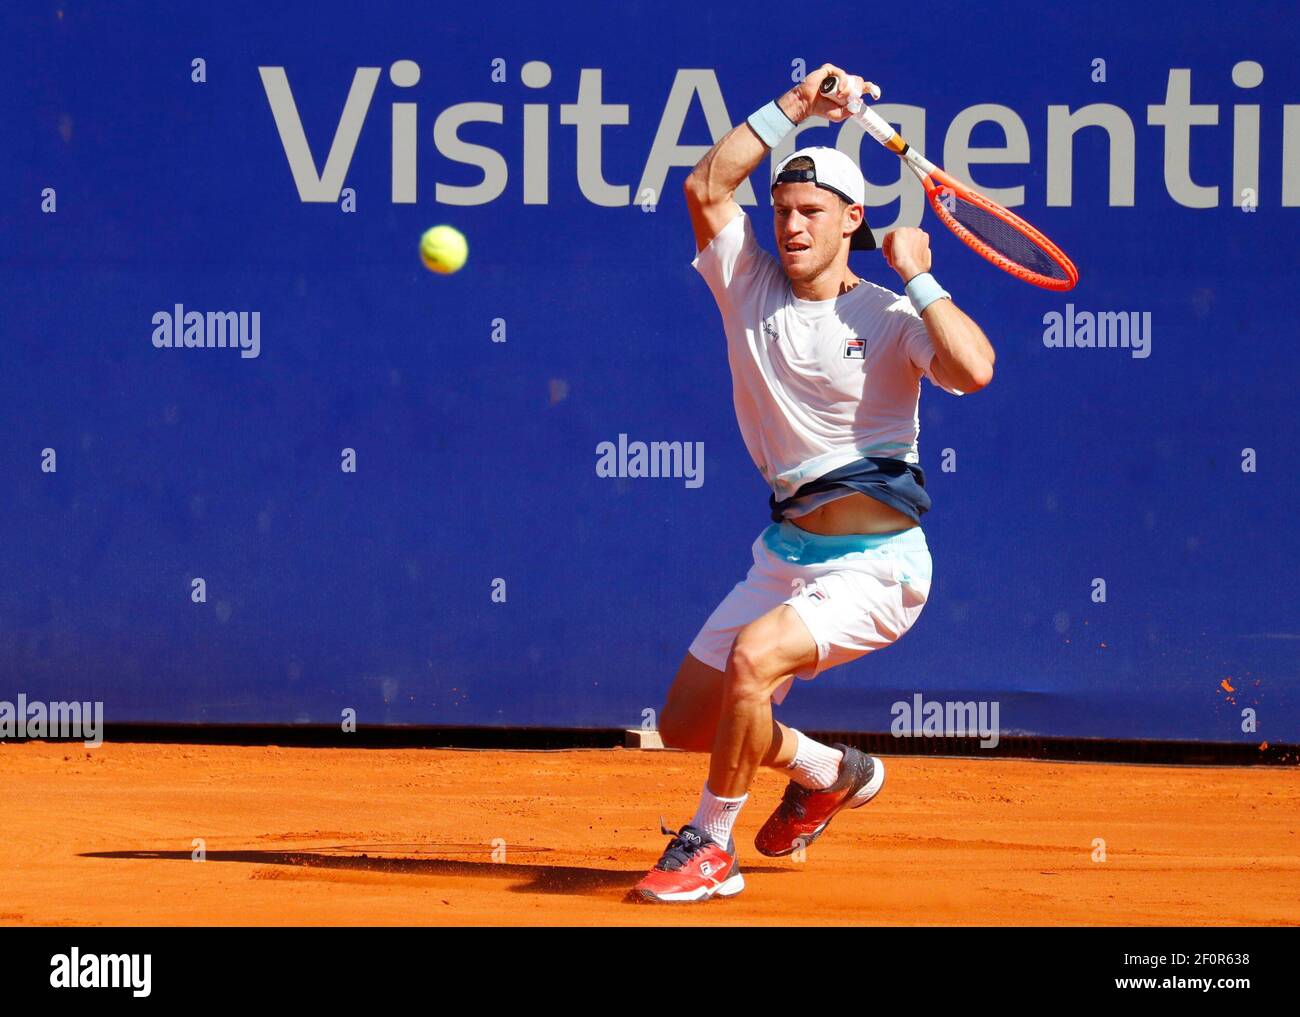 Tennis - ATP 250 - Argentina Open - Buenos Aires Lawn Tennis Club, Buenos  Aires, Argentina - March 7, 2021 Argentina's Diego Schwartzman in action  during the final against Argentina's Francisco Cerundolo REUTERS/Agustin  Marcarian Stock Photo - Alamy